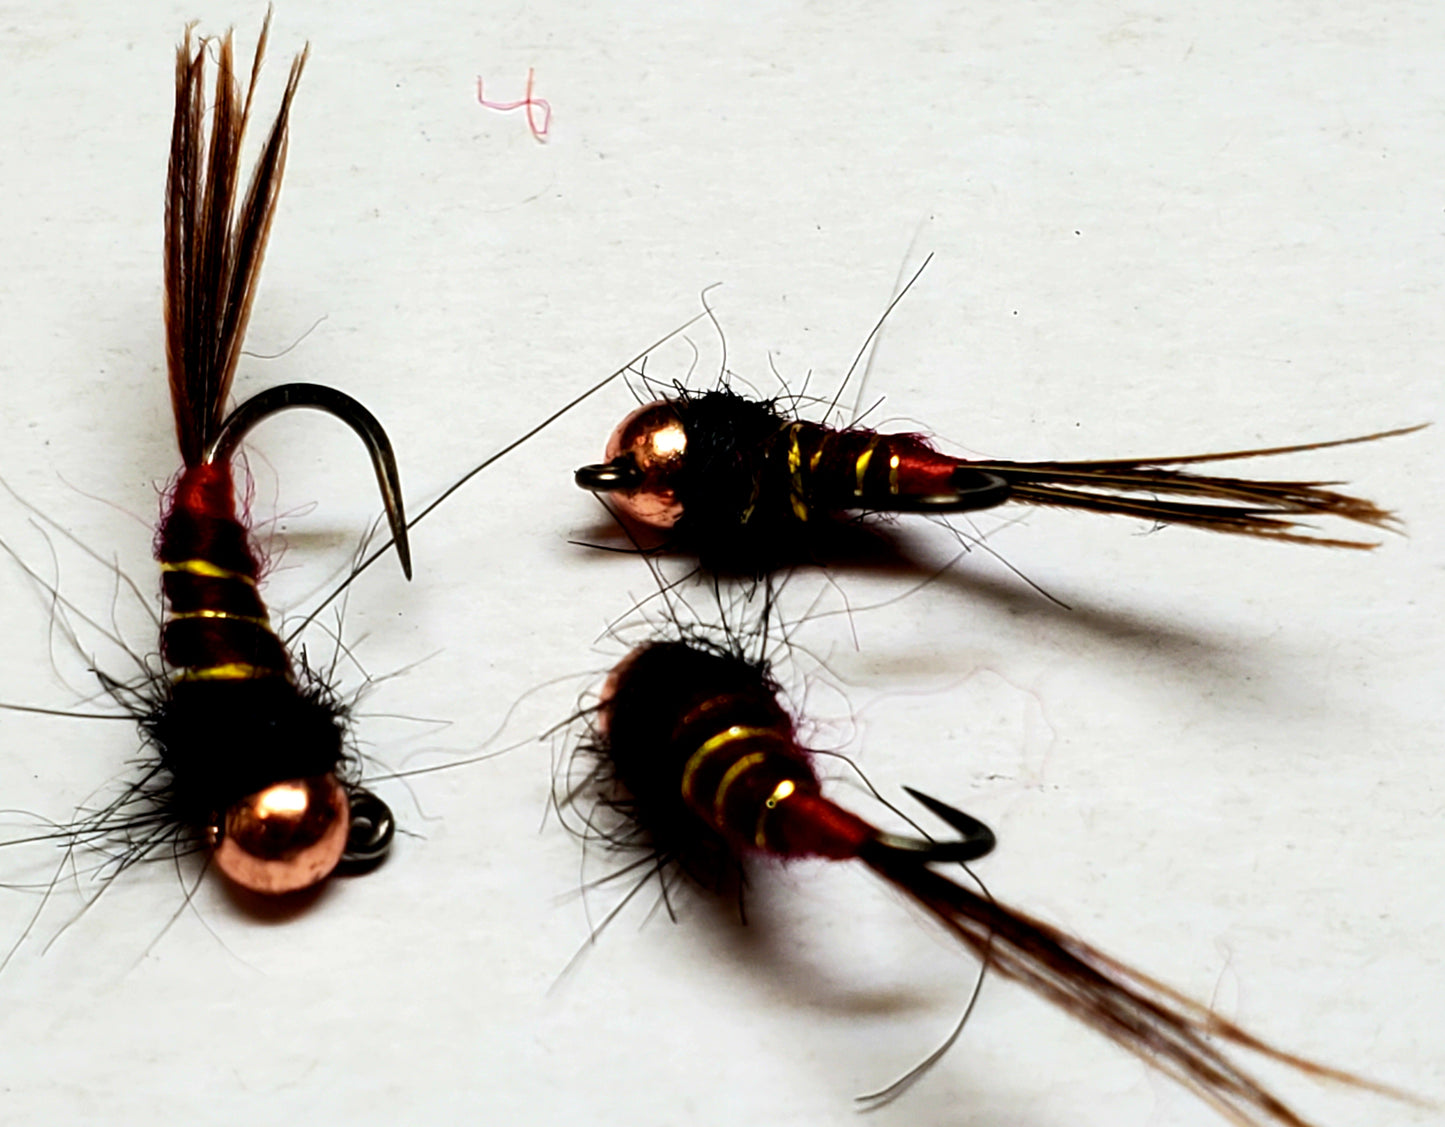 Trout Jig, Tungsten Bead Head Trout Jig, Trout Jig Nymph, Bead Head Nymph, Trout Jig Pheasant Tail with Red Tag